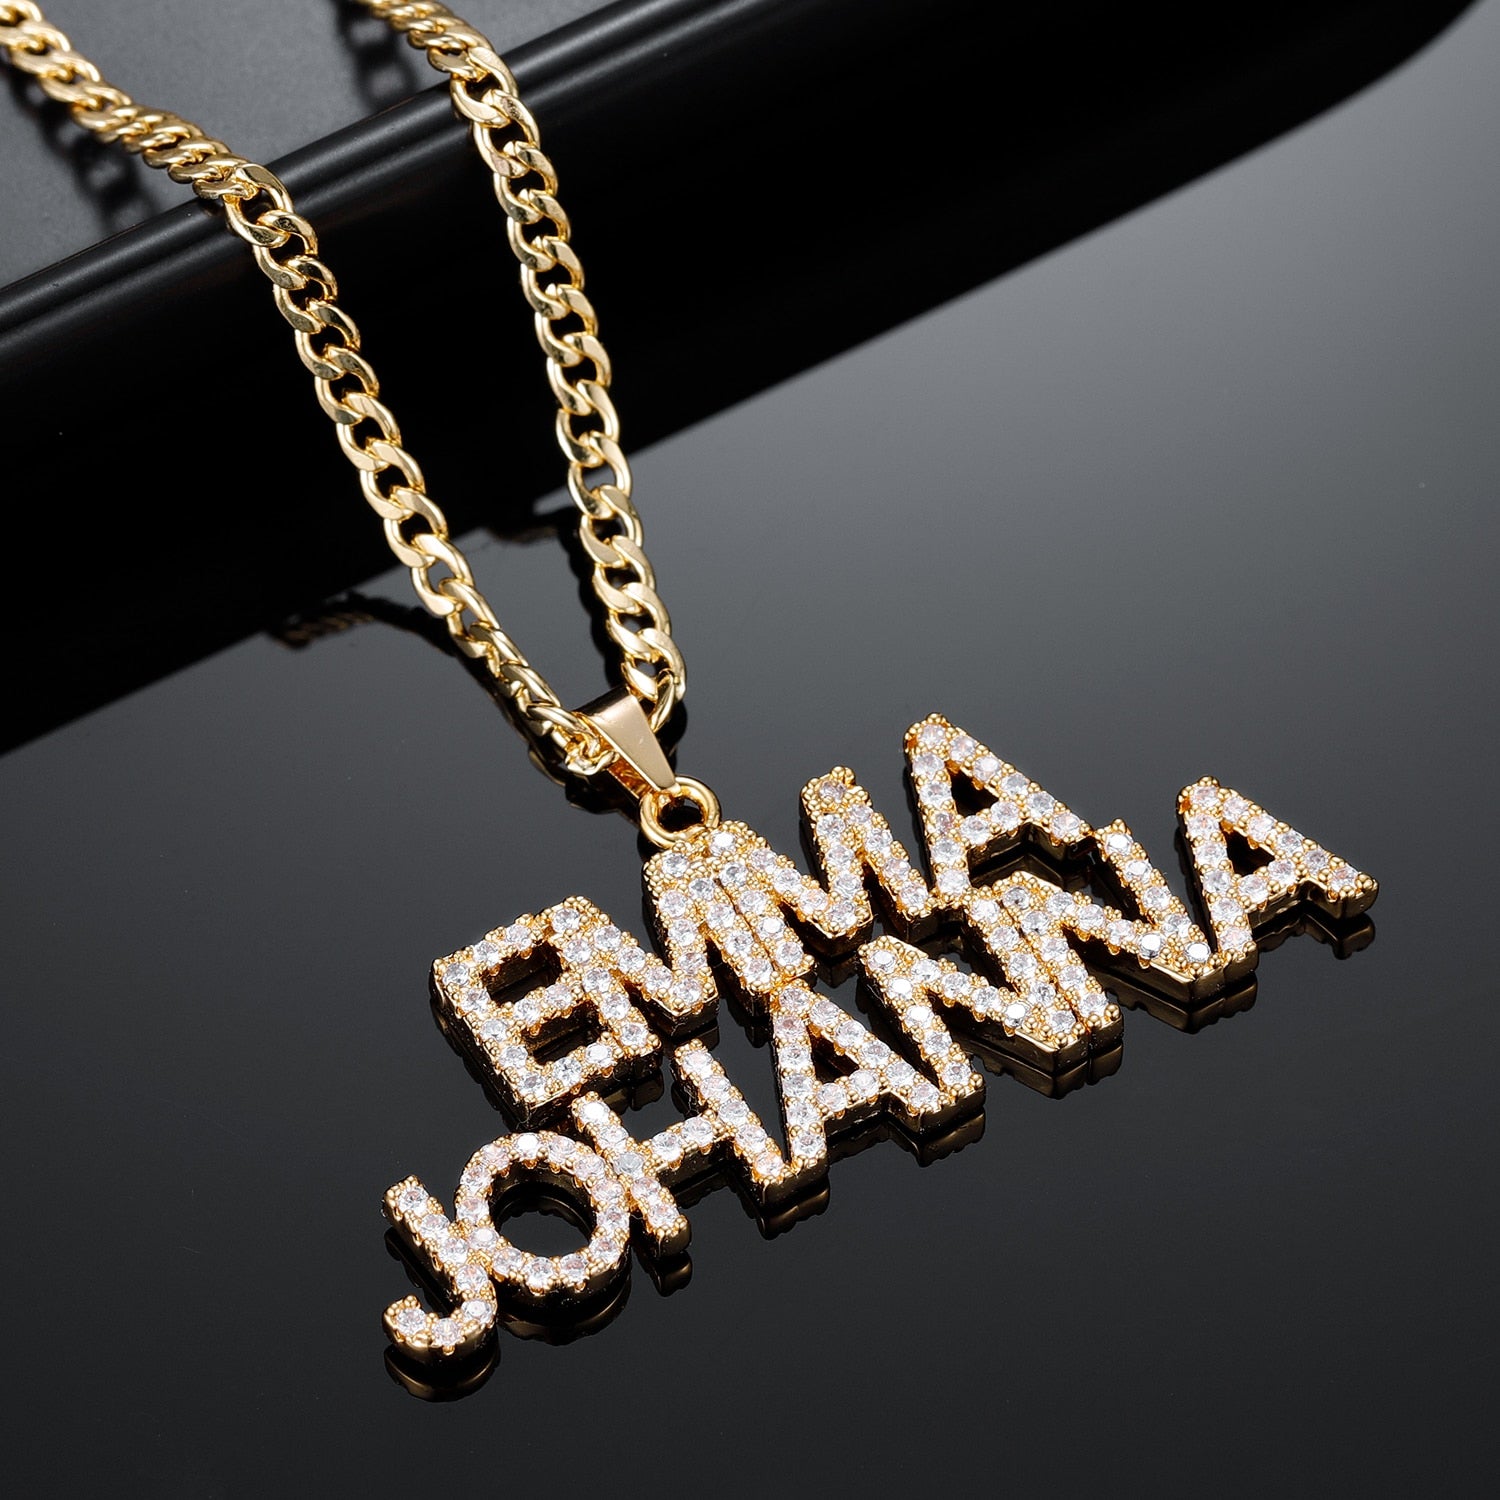 Personalized Lock Necklace - GOLD – Ice Dream Jewelry